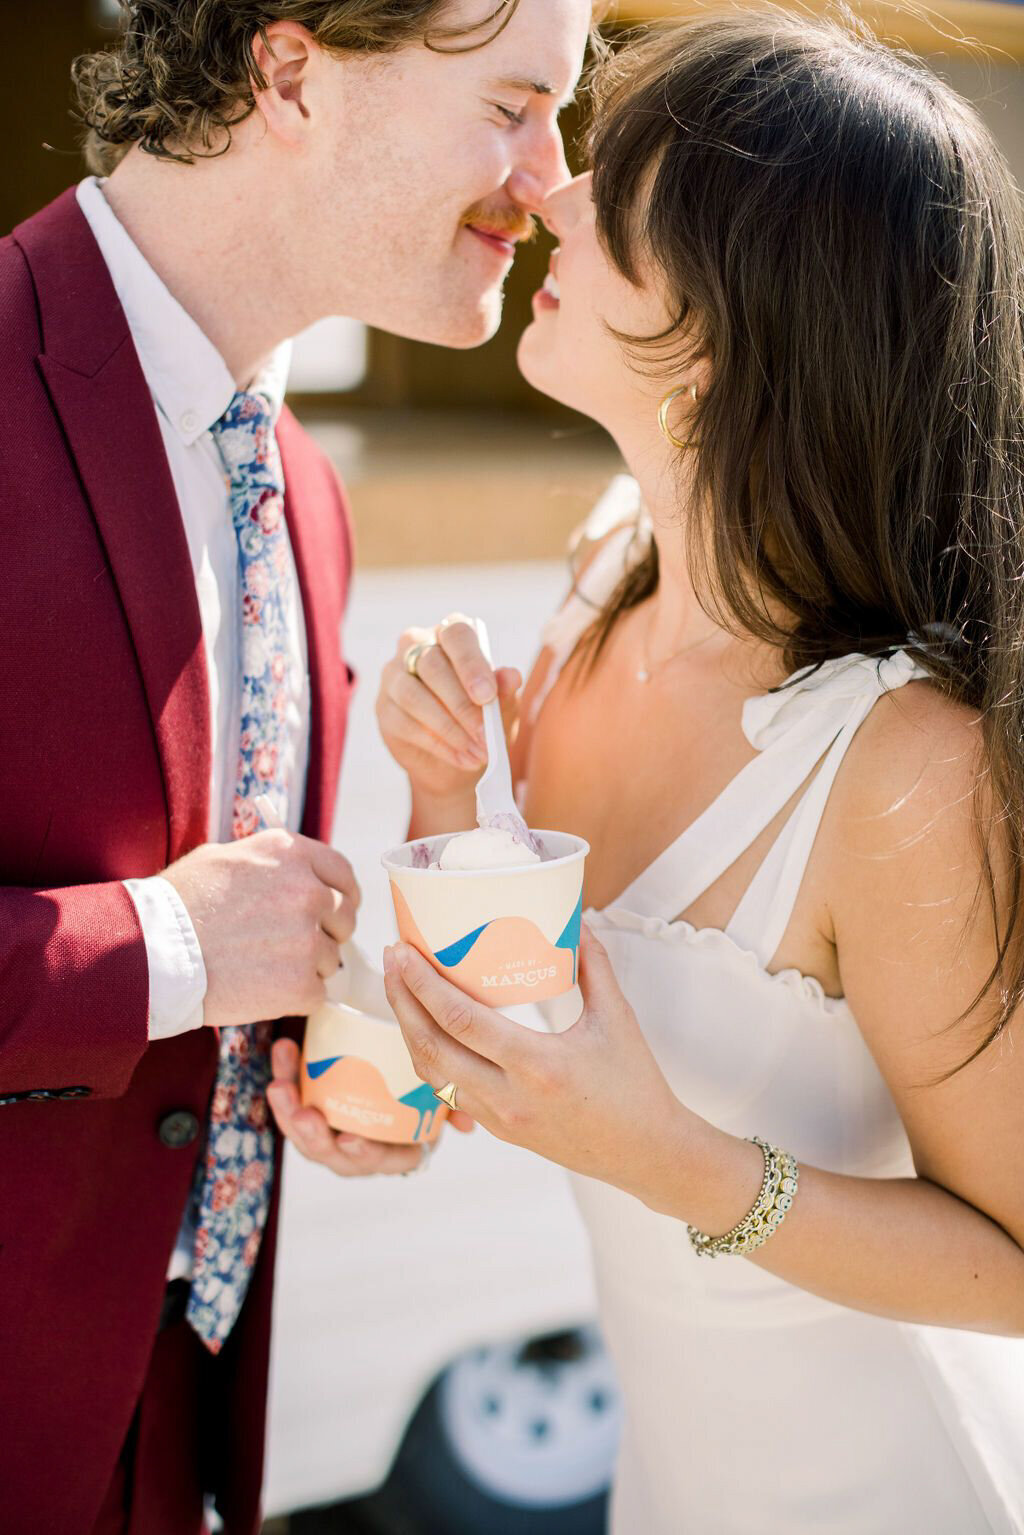 Couple eating ice cream from Groom wearing burgundy suit and floral tie, bride in sleek modern bridal gown in front of Made By Marcus, unique and playful ice cream based in Calgary, AB. Featured on the Brontë Bride Vendor Guide.